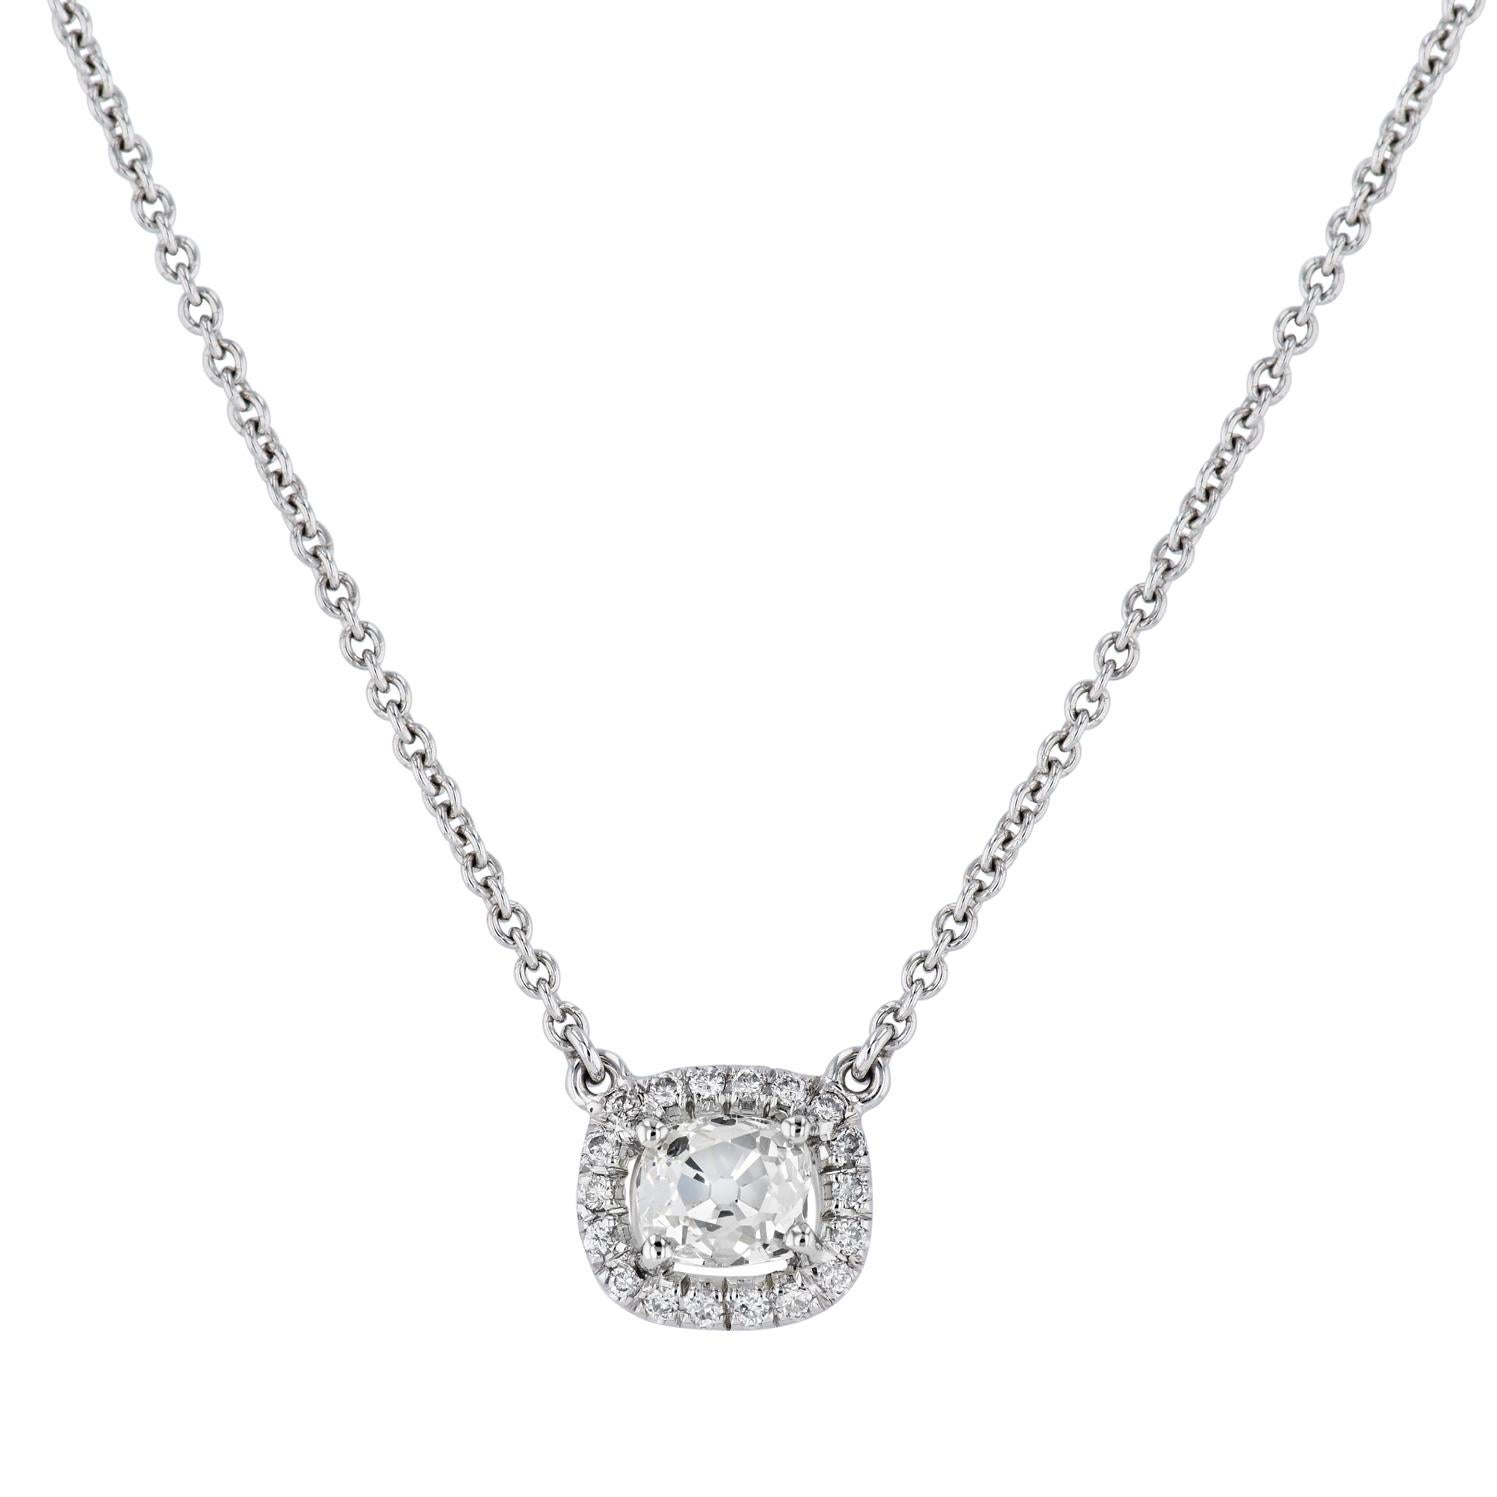 Handmade Old Mine Cushion Cut White Gold Diamond Pave Pendant Necklace In New Condition For Sale In Miami, FL